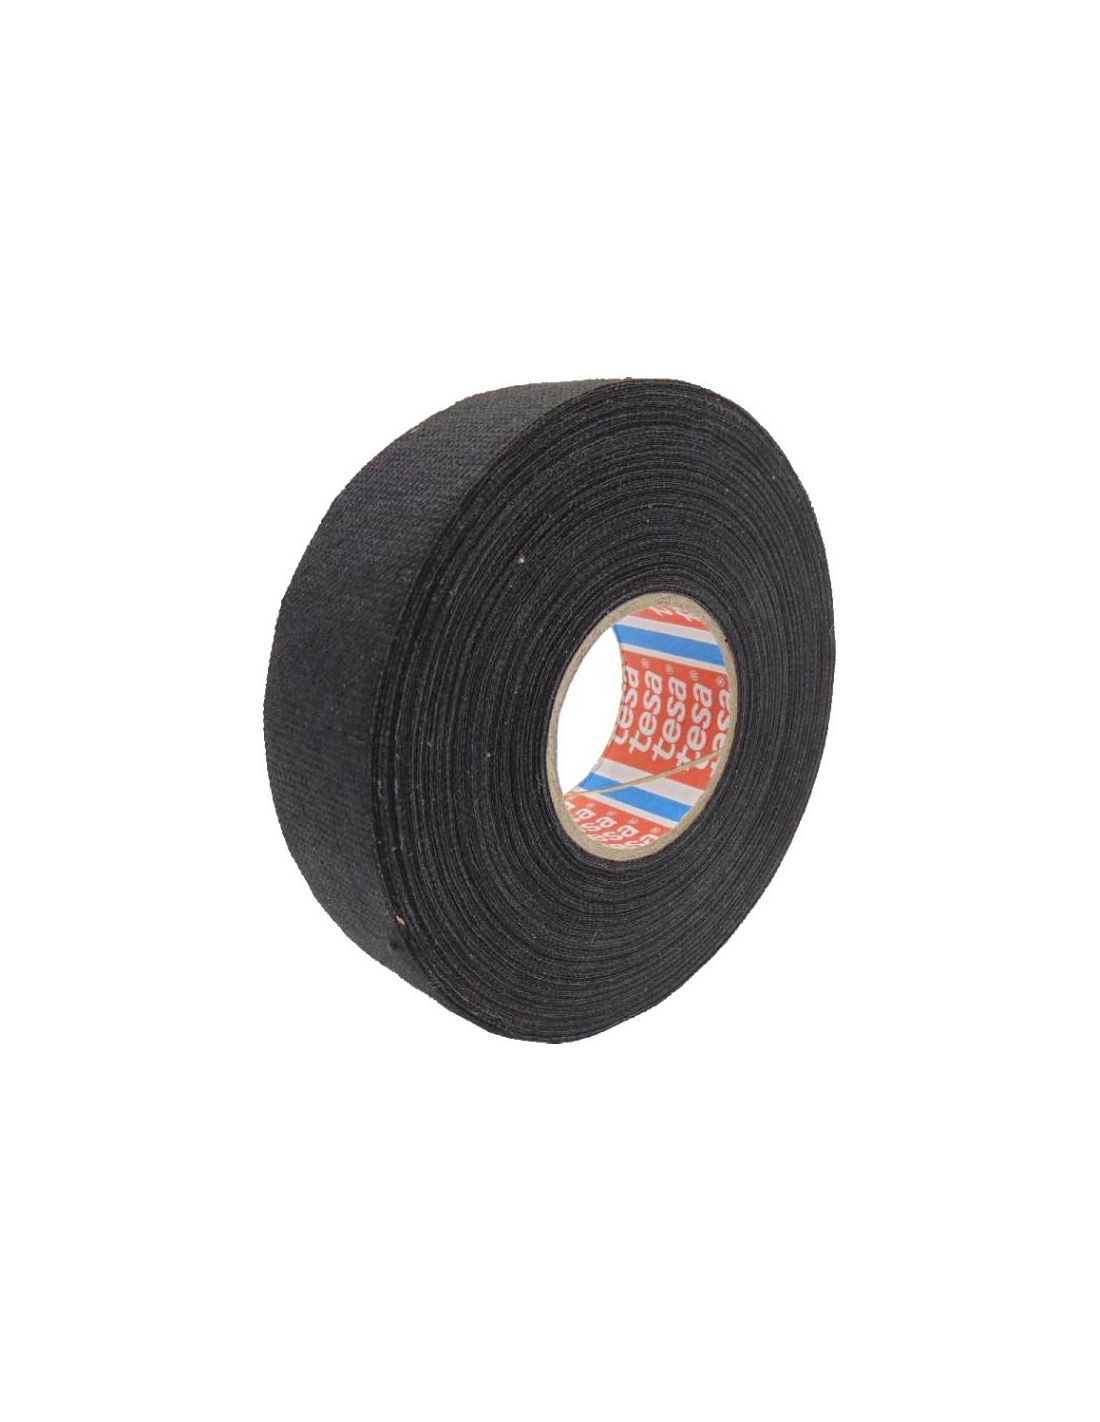 Textile tape 25mmx0,3mm reel of 25m